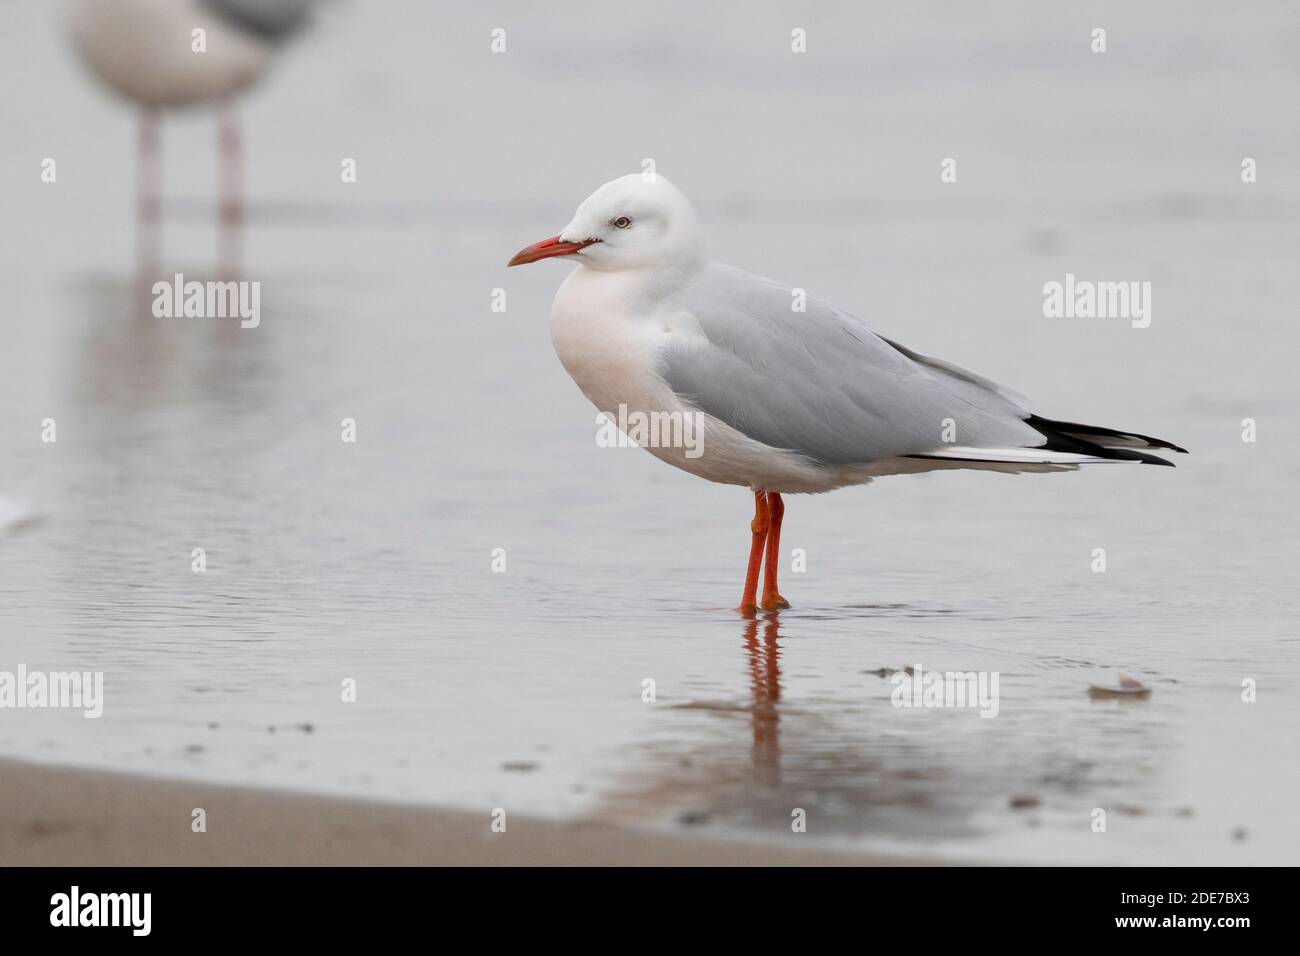 Slender-billed Gull (Chroicocephalus genei), side view of an adult in winter plumage standing on the shore, Campania, Italy Stock Photo